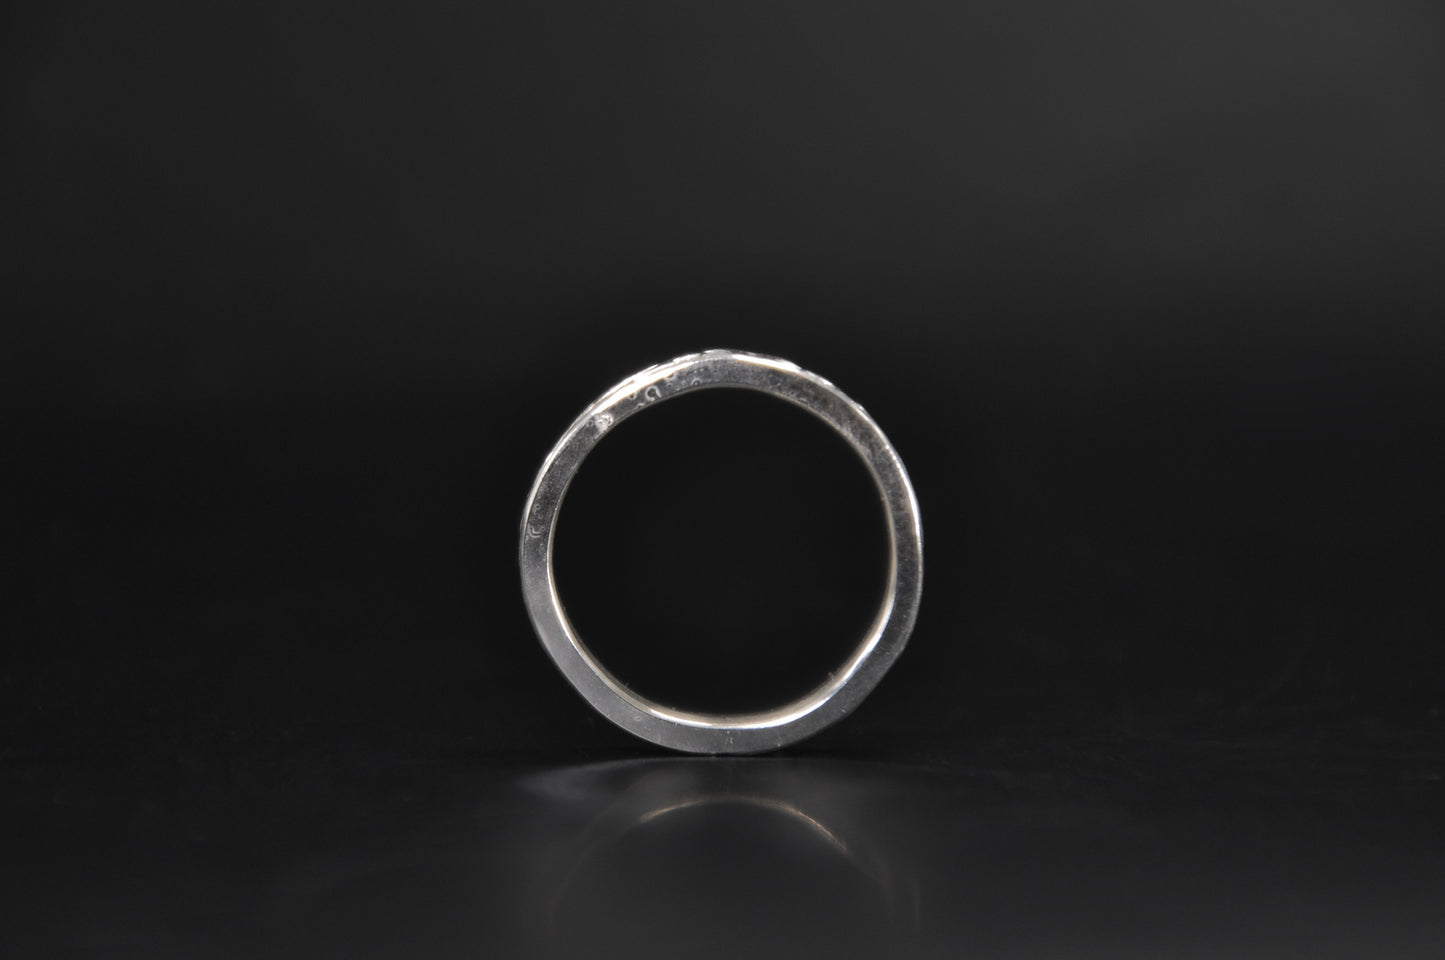 Wave Patterned Sterling Silver Band